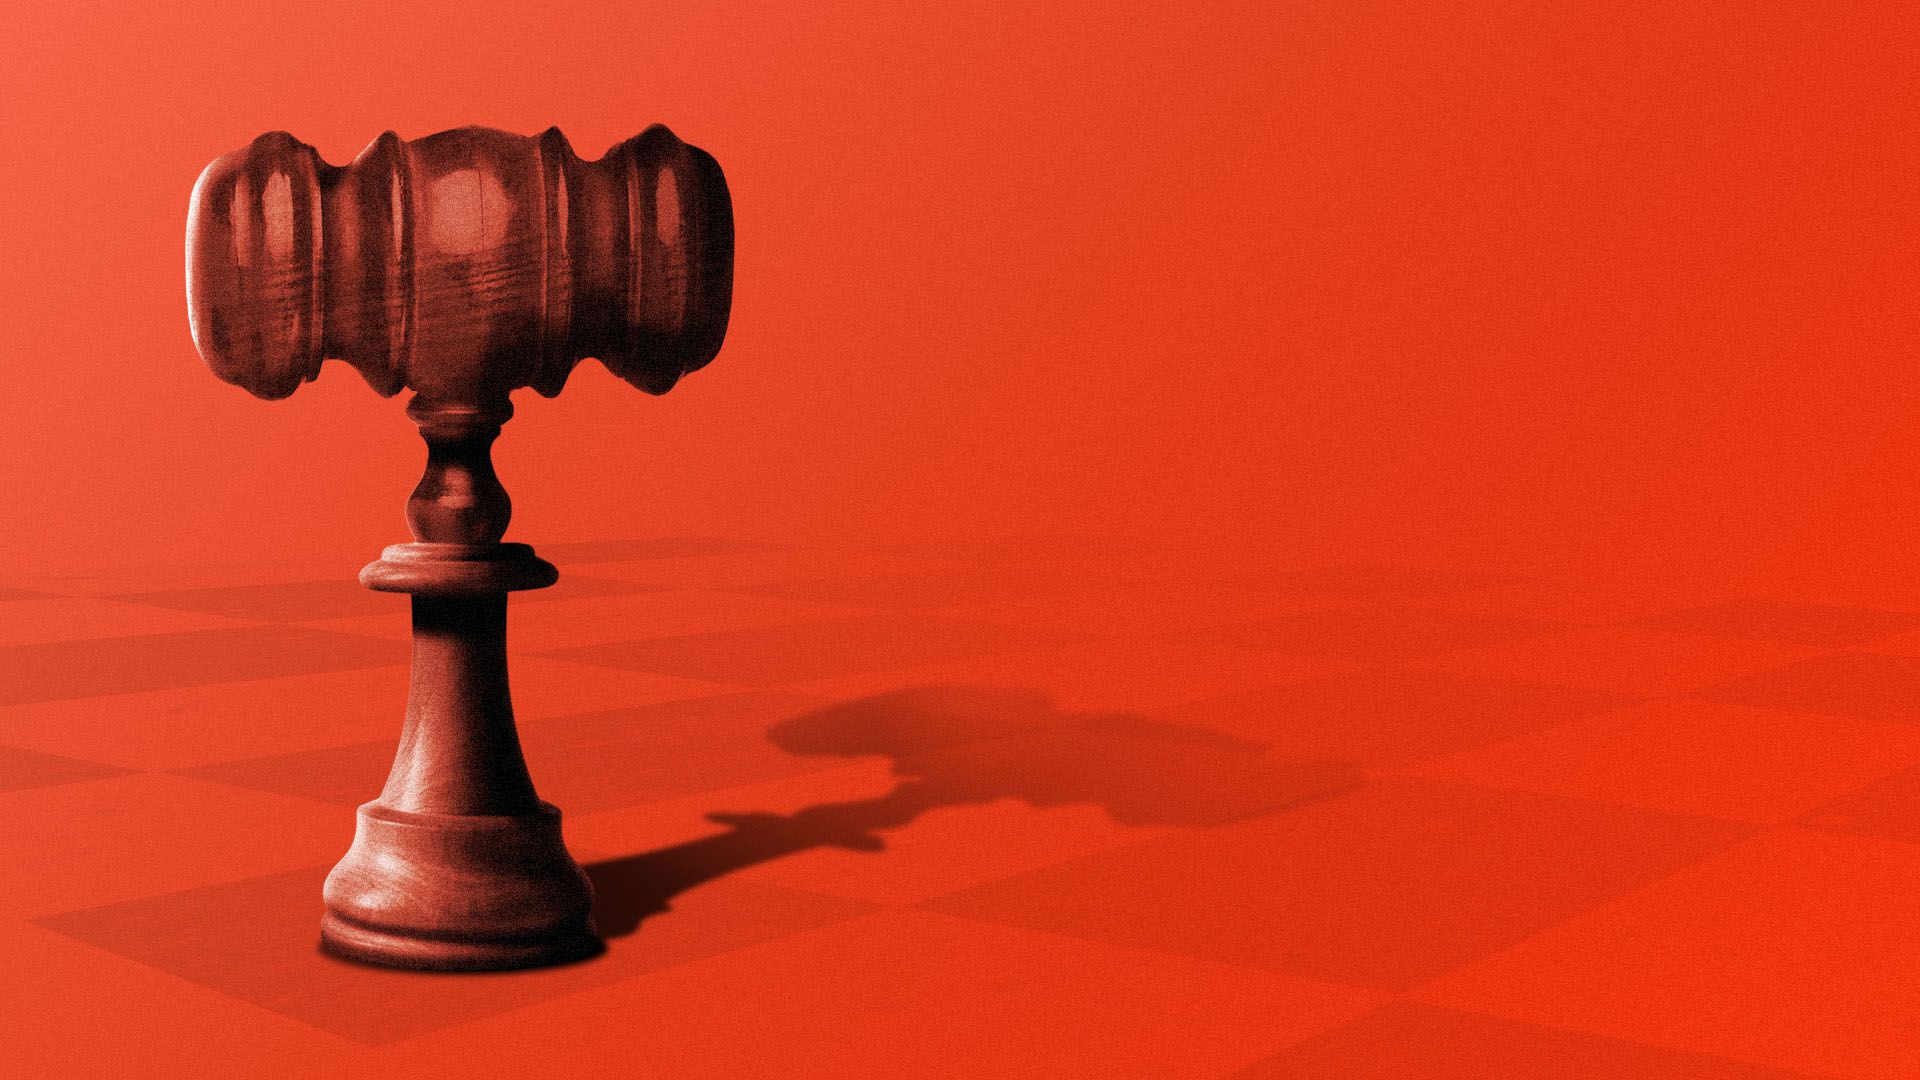 Illustration of a chess piece with a gavel top